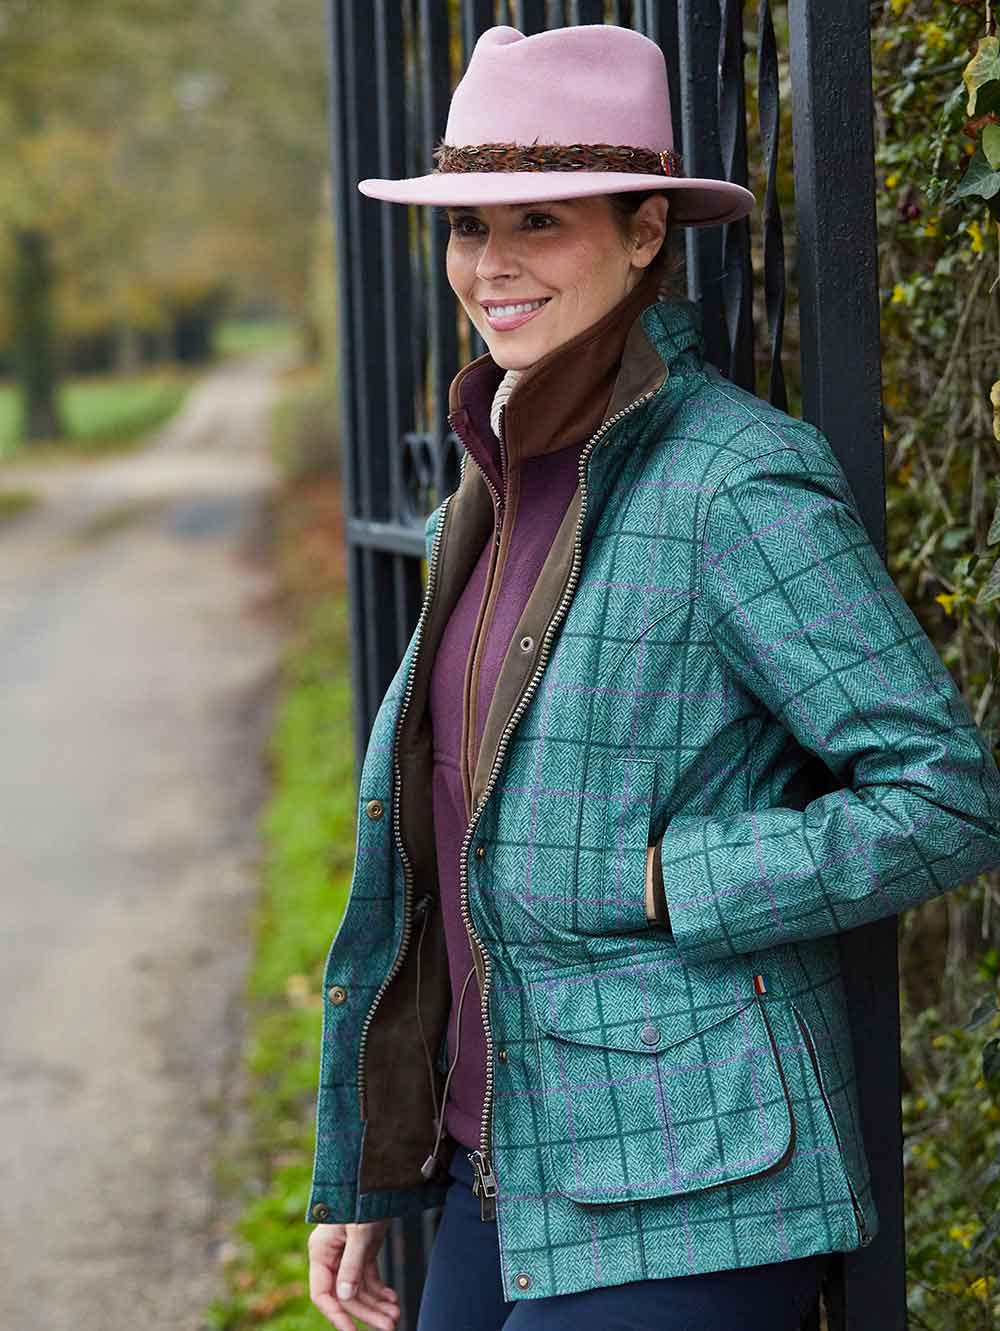 Women’s Country Clothing: Smart, Stylish And Practical